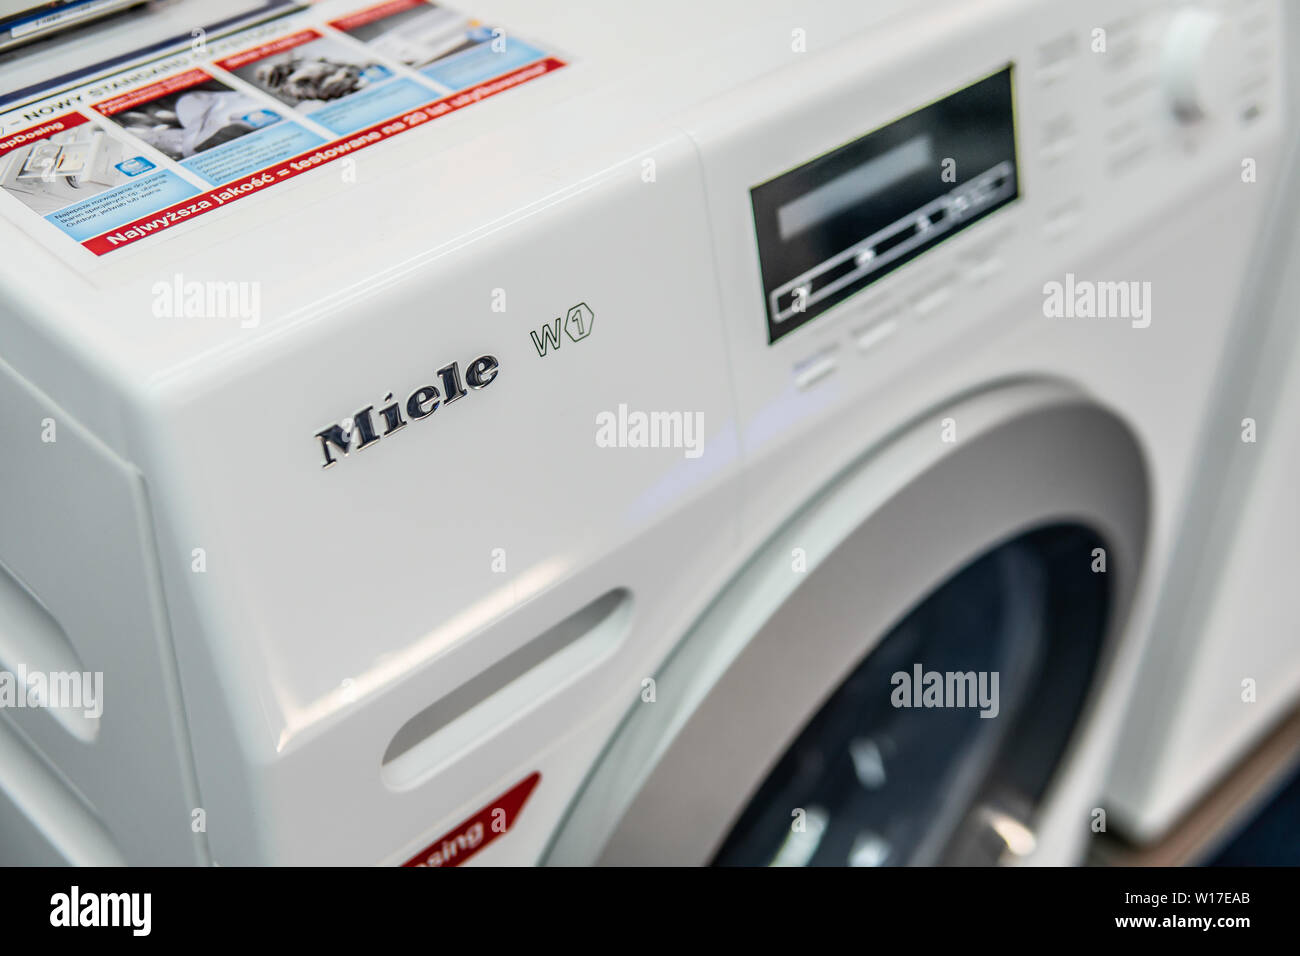 Lodz, Poland, July 2018 inside Saturn electronic store, free-standing Miele dryer washing machine on display for sale, Miele sign, symbol, logo, brand Stock Photo